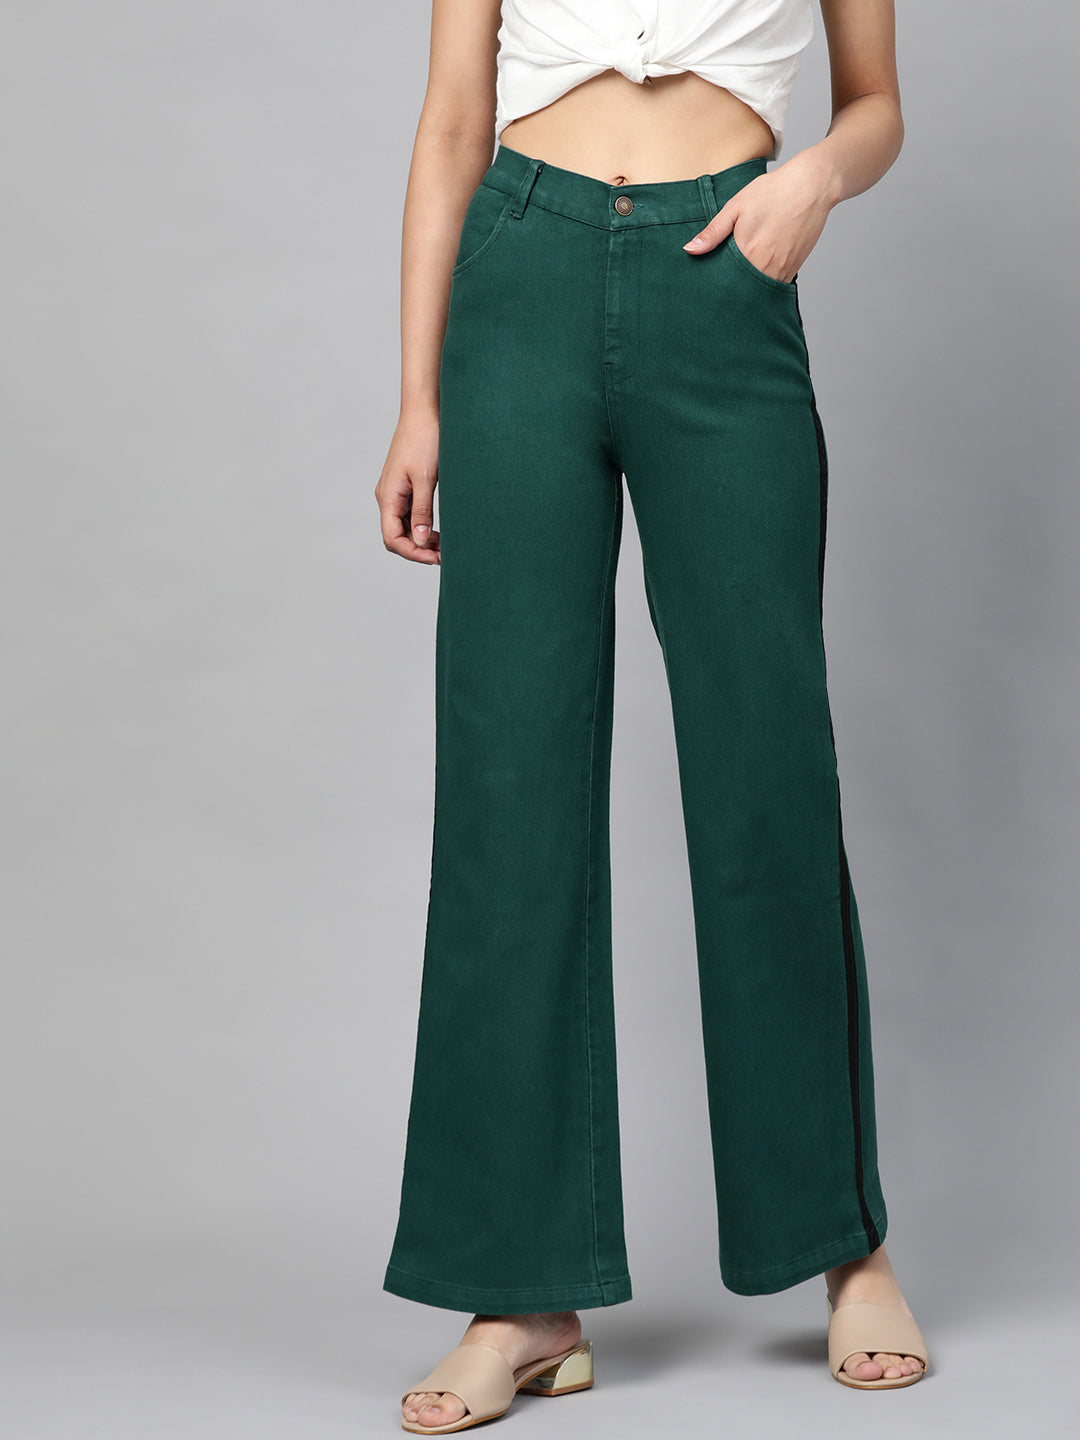 500 Bell bottoms ideas in 2023  bell bottoms fashion flares